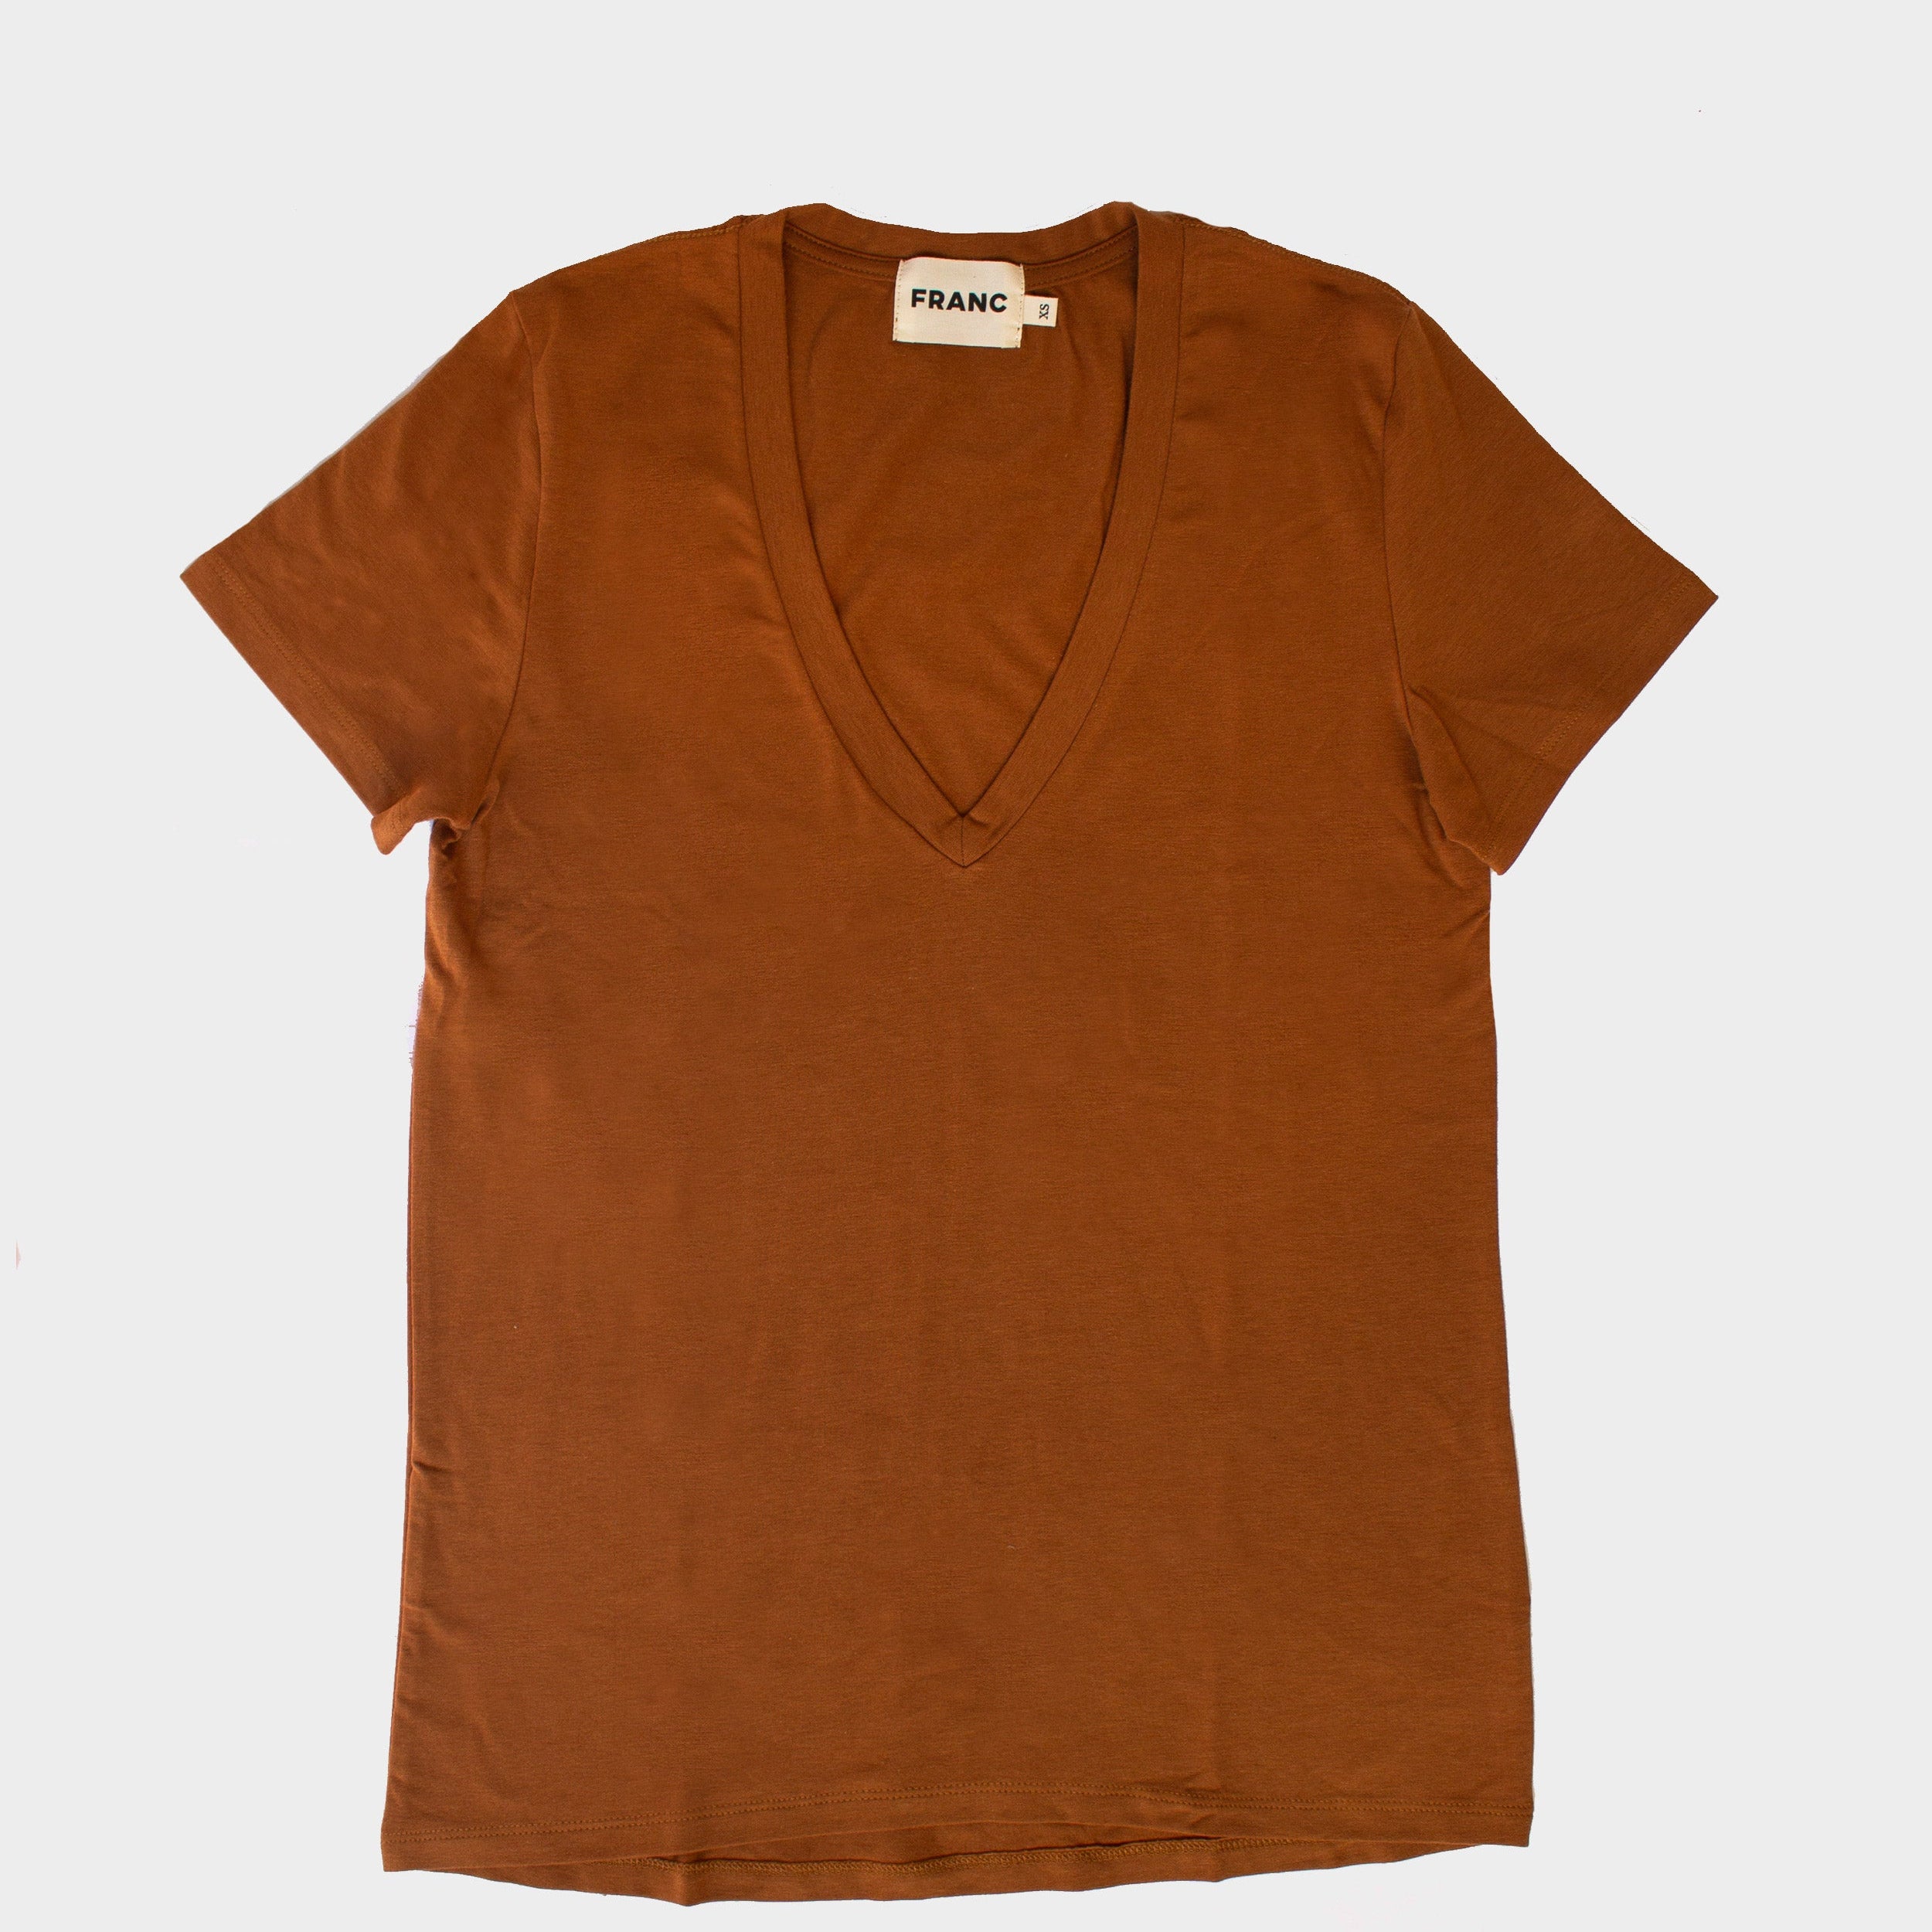 The V - Neck Tee in Copper | FRANC Sustainable Clothing